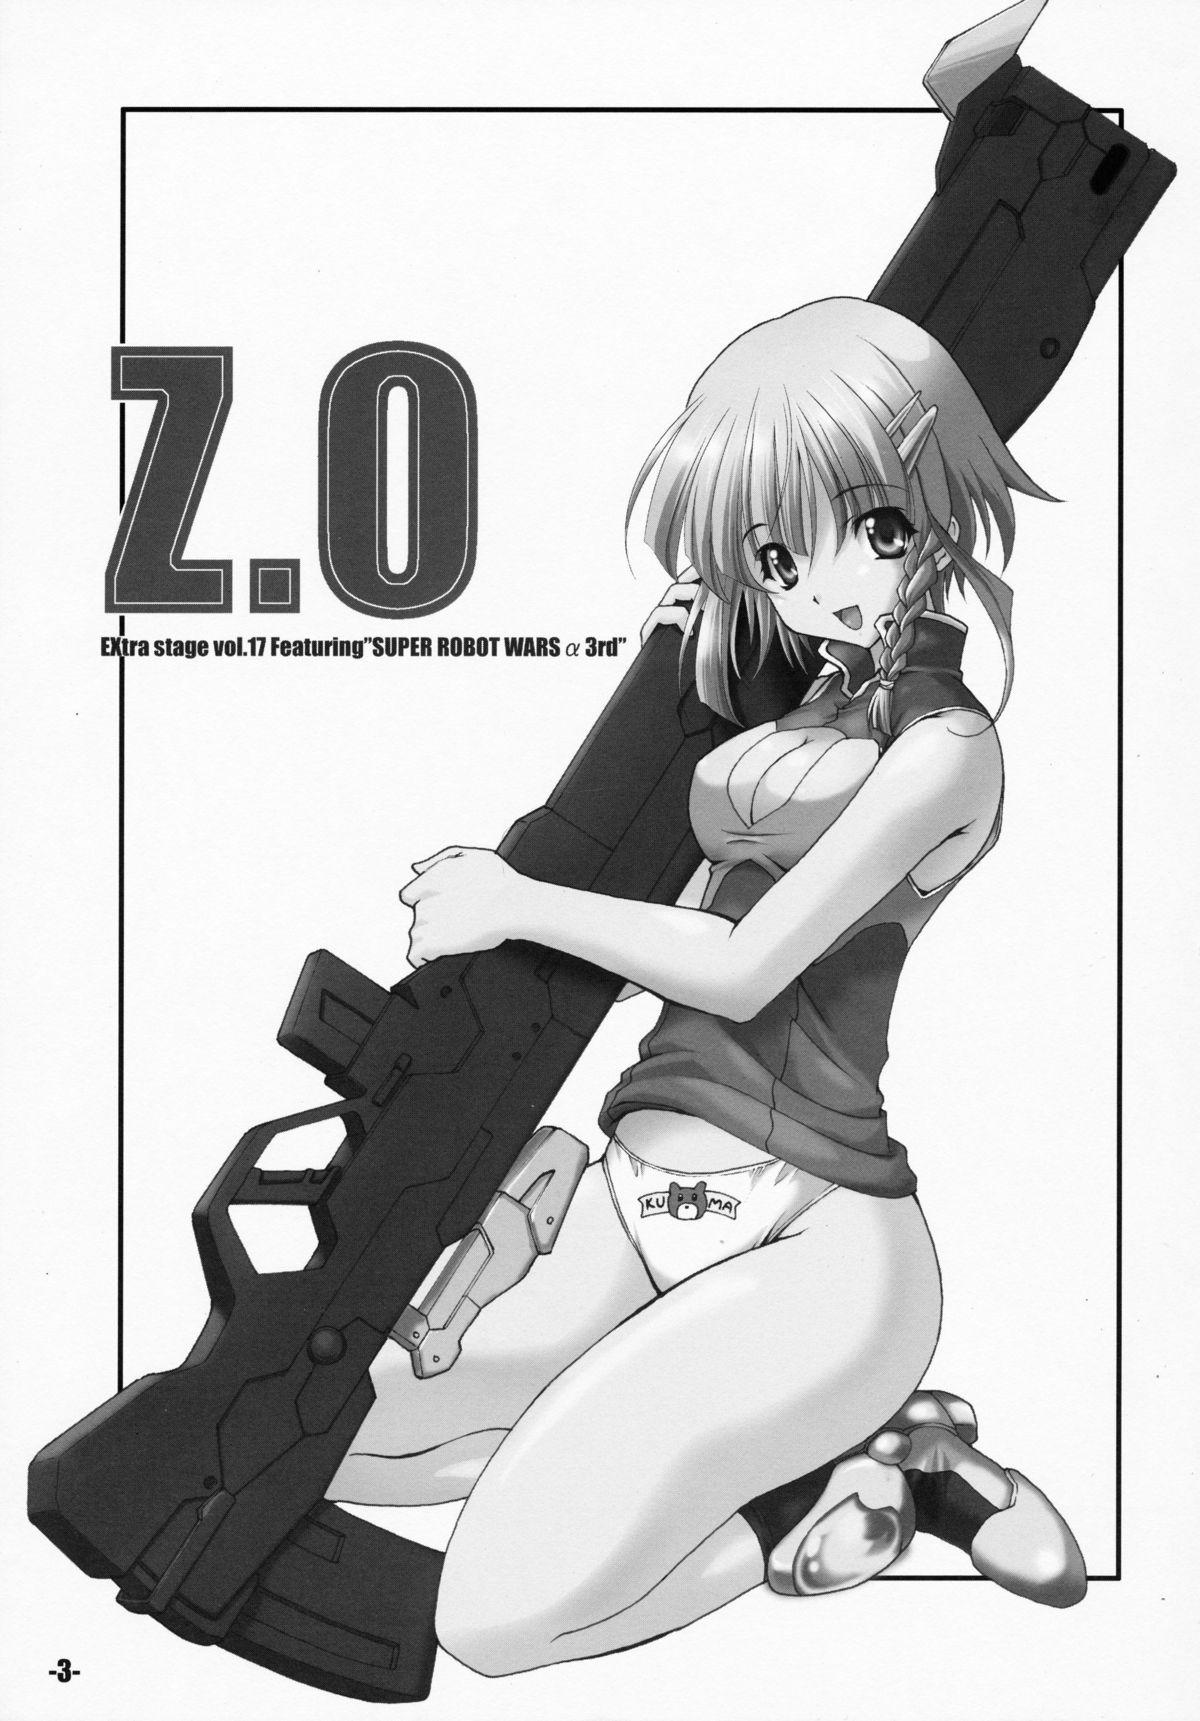 Natural Boobs EXtra stage vol.17 Z.O - Super robot wars Mom - Page 3